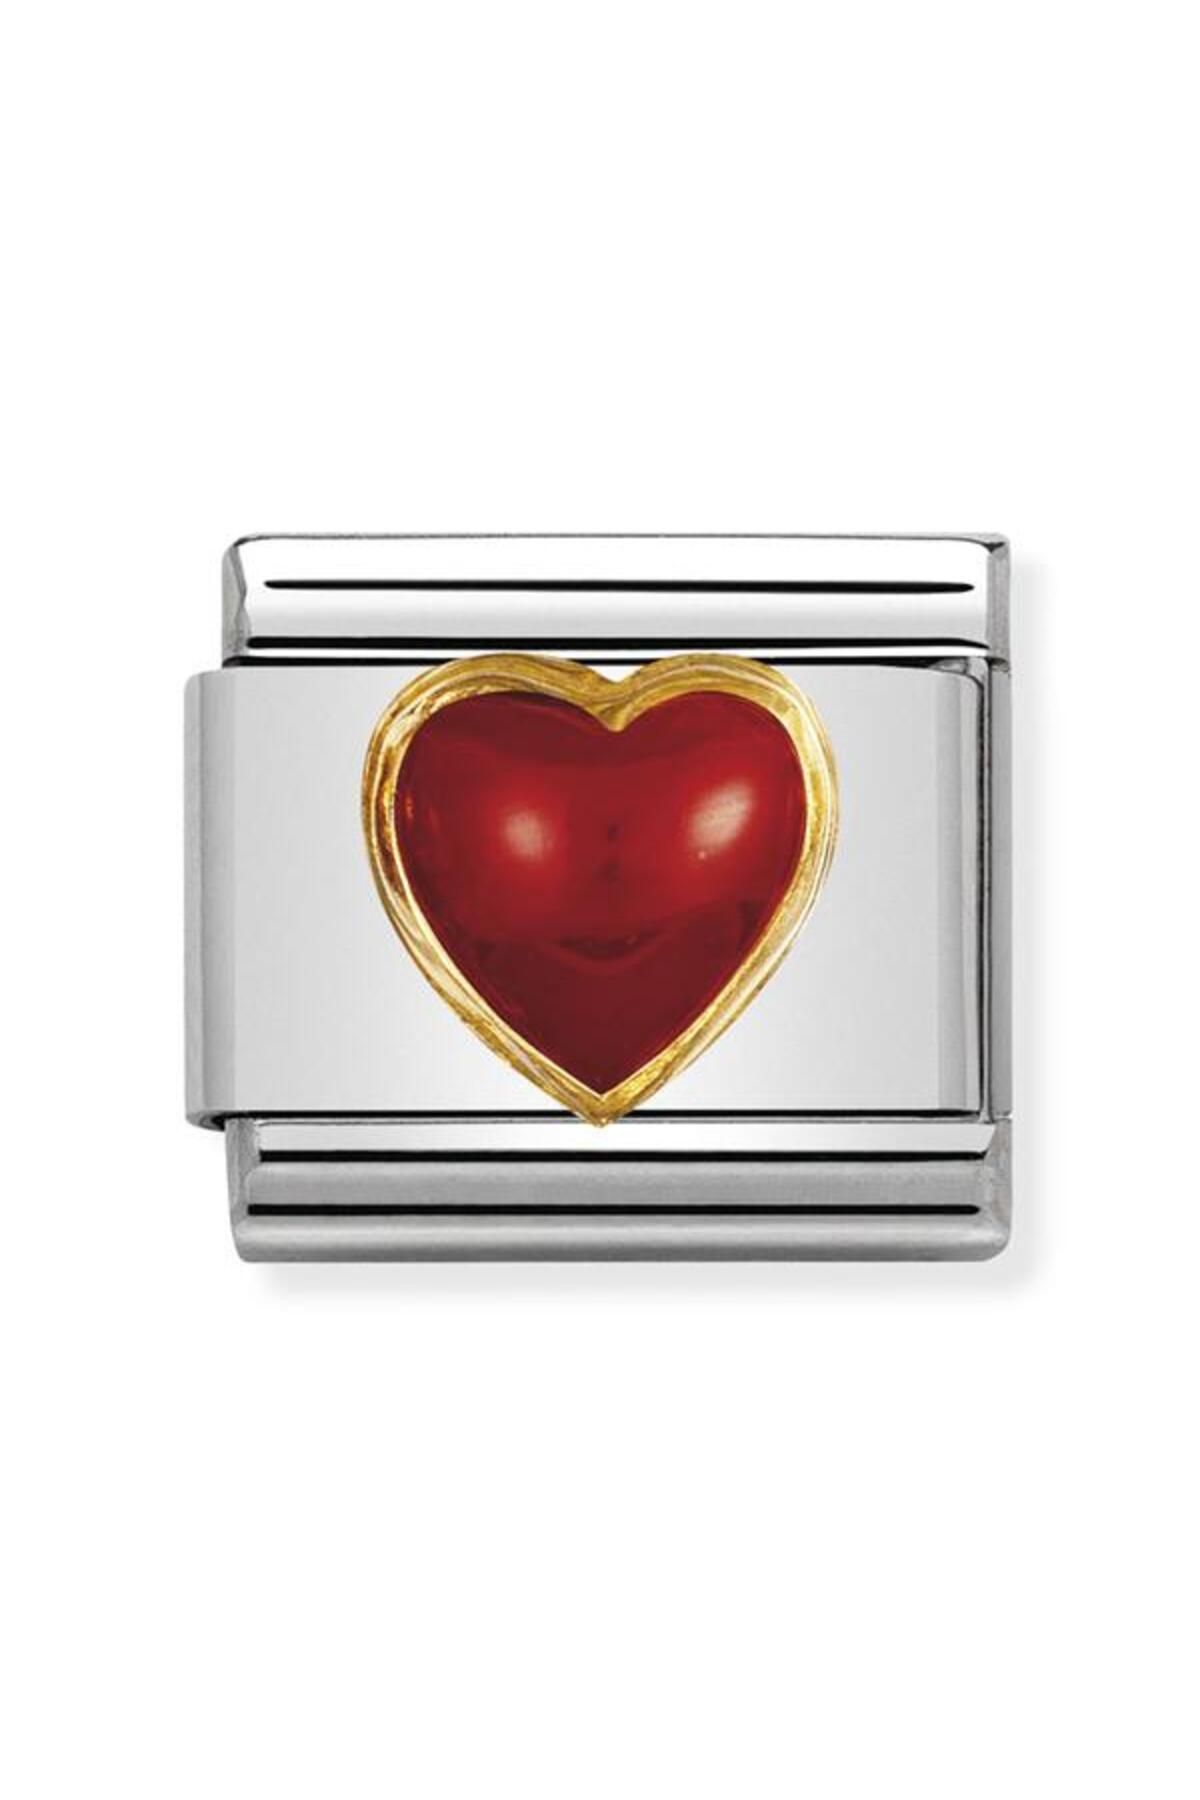 NOMİNATİON Composable Classic Stones Hearts In Stainless Steel With 18k Gold (11_red Coral)